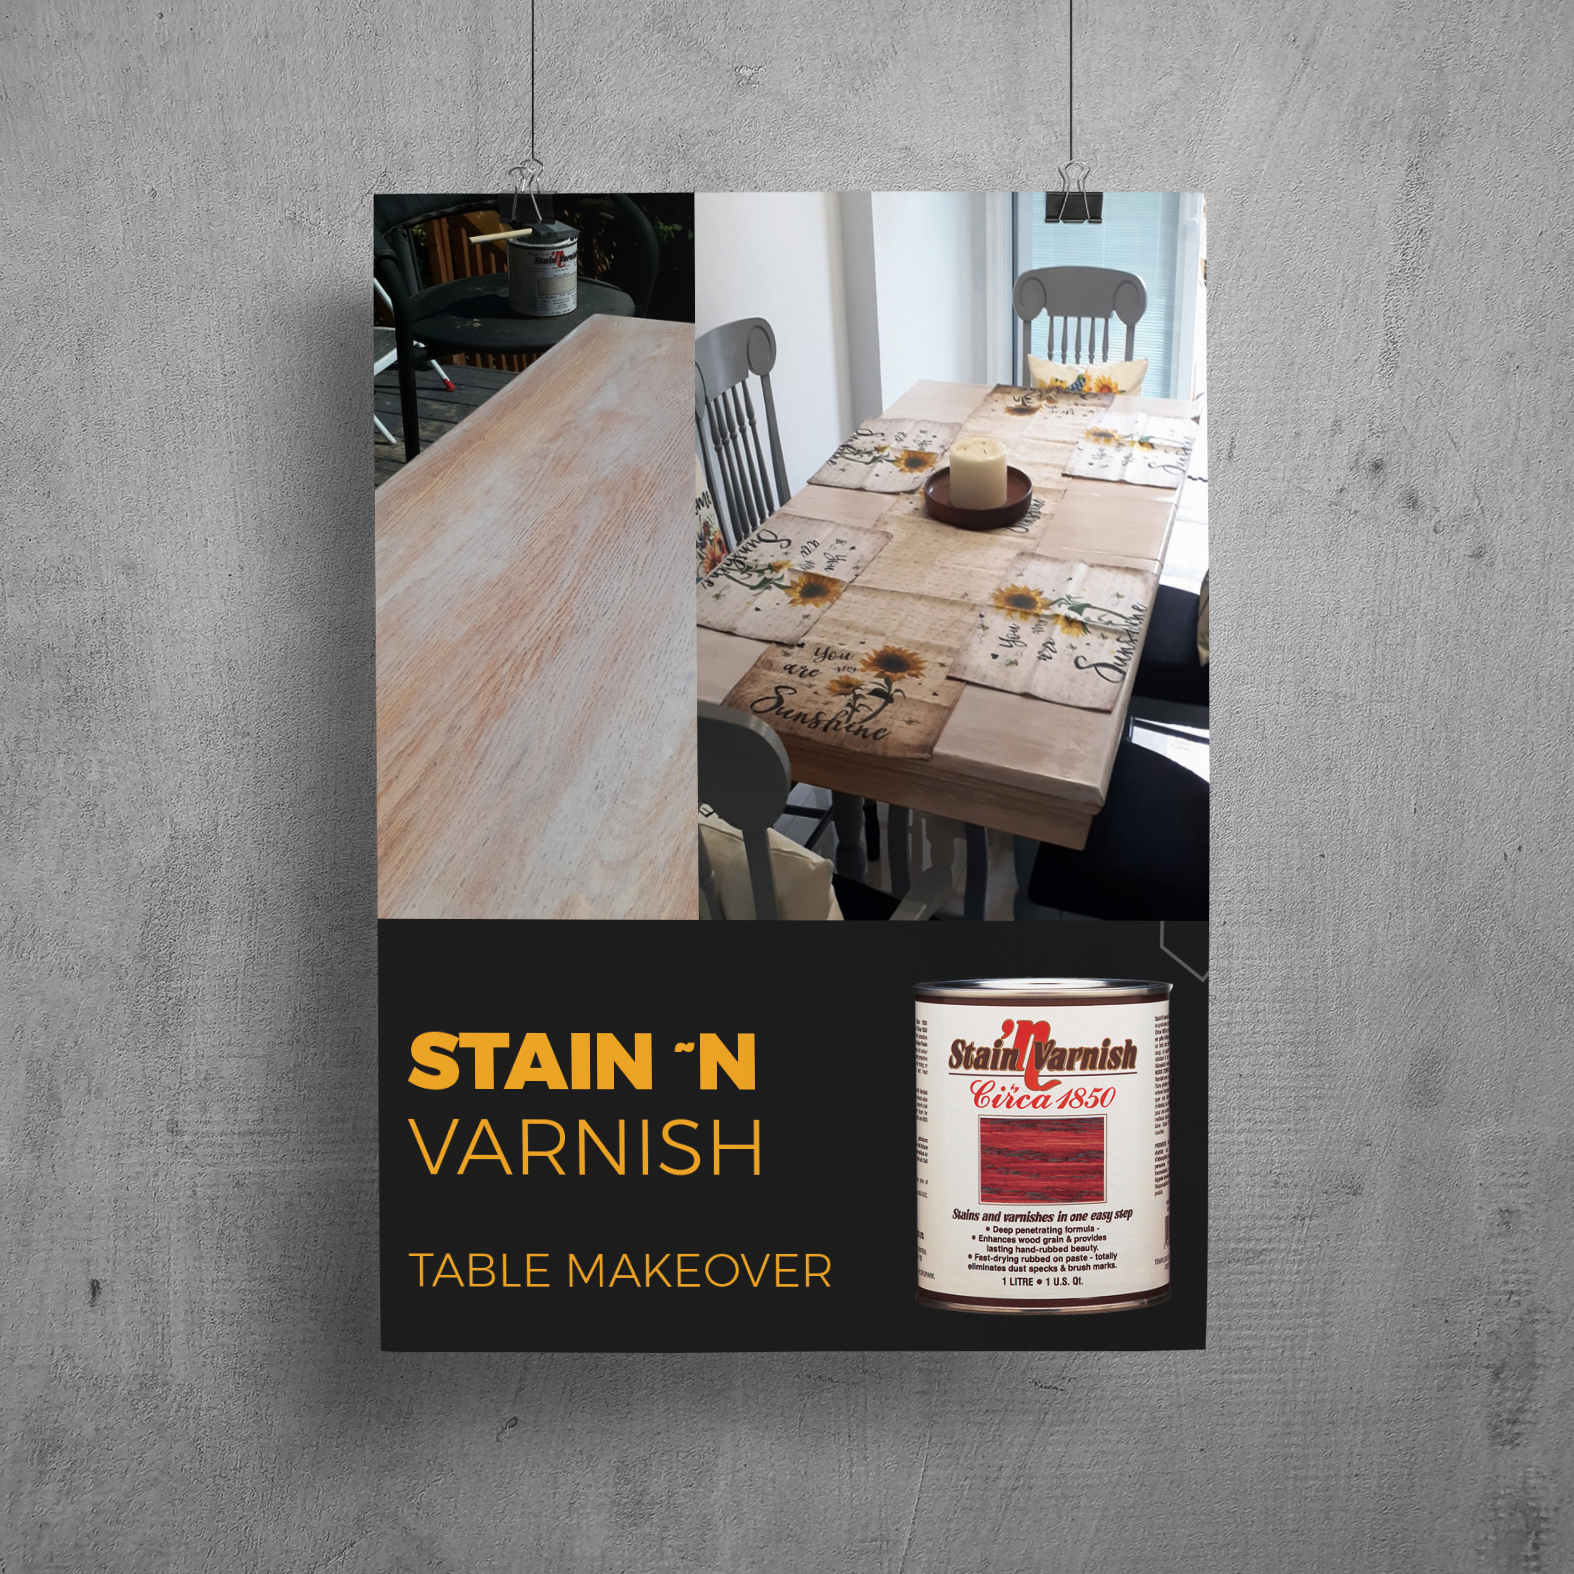 Stain 'n Varnish Table Makeover